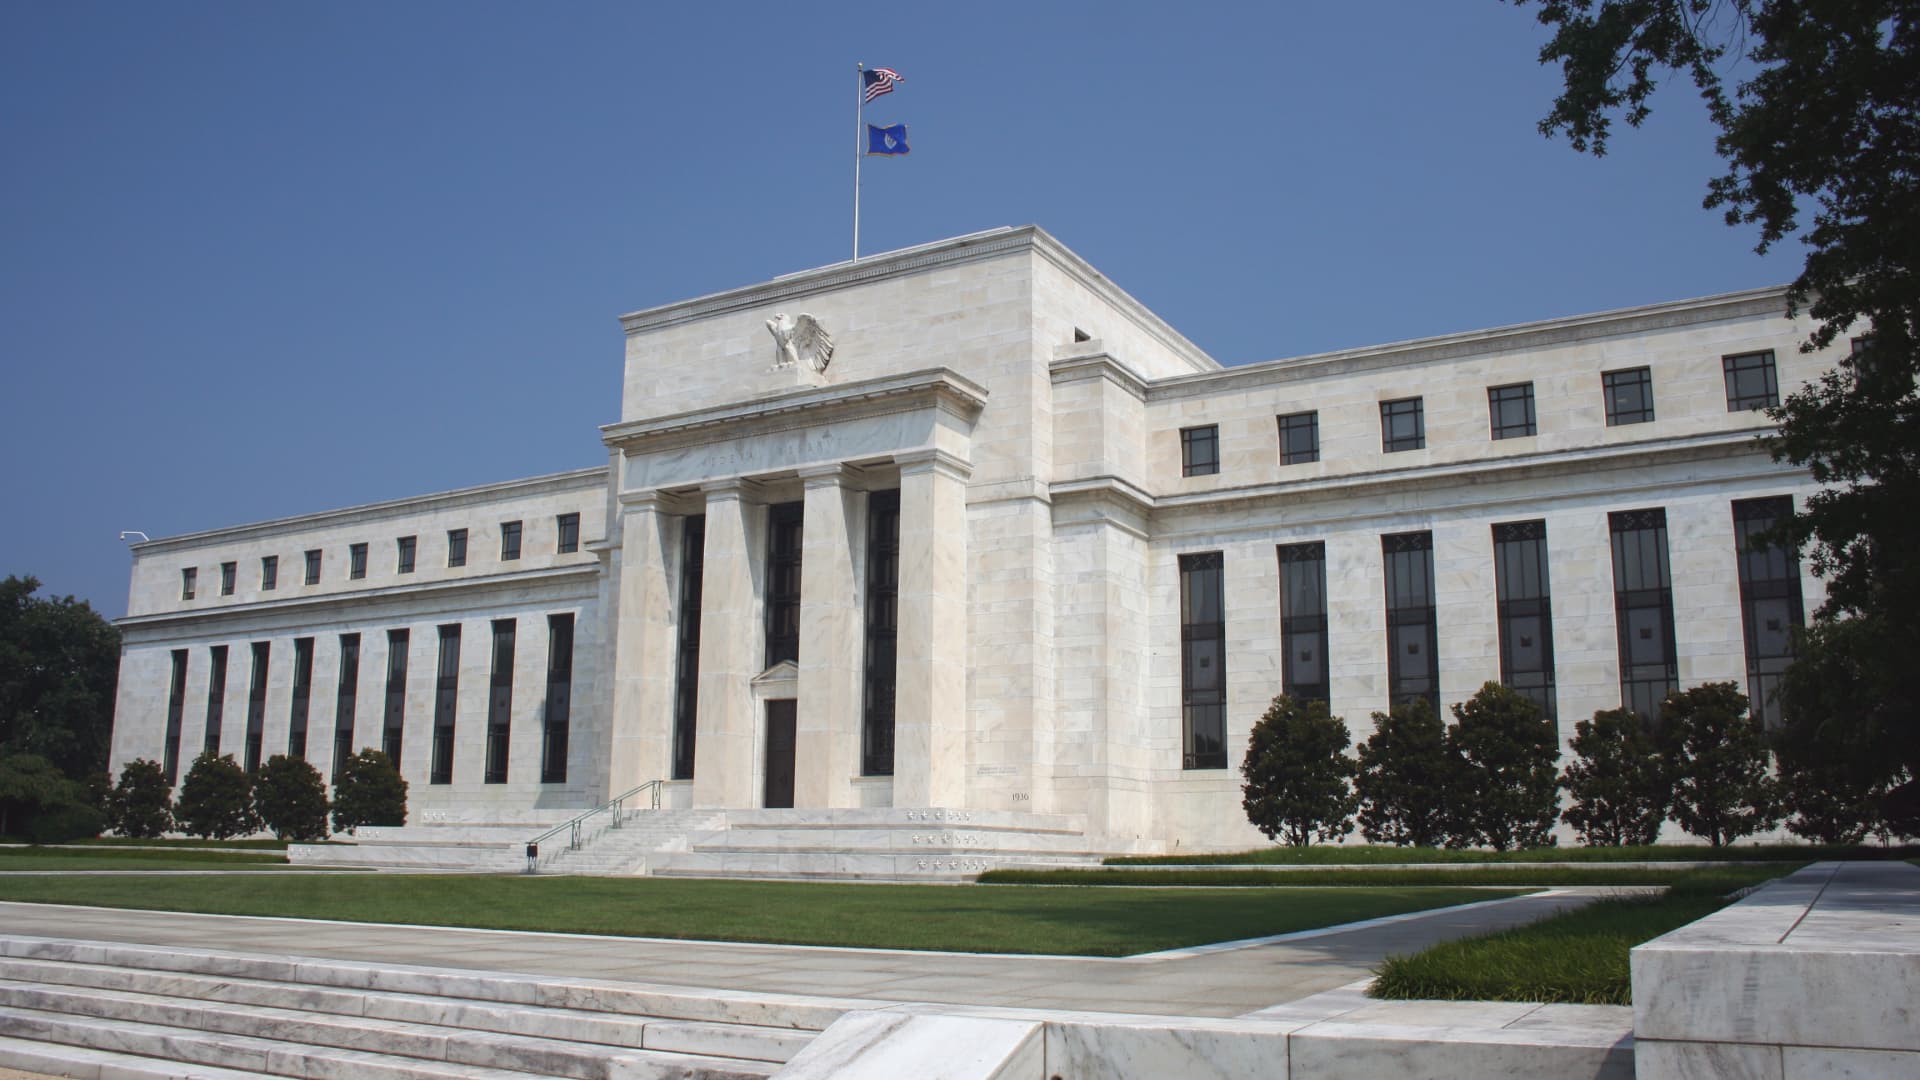 Worries linger about financial stability following bank rescue, Fed report shows